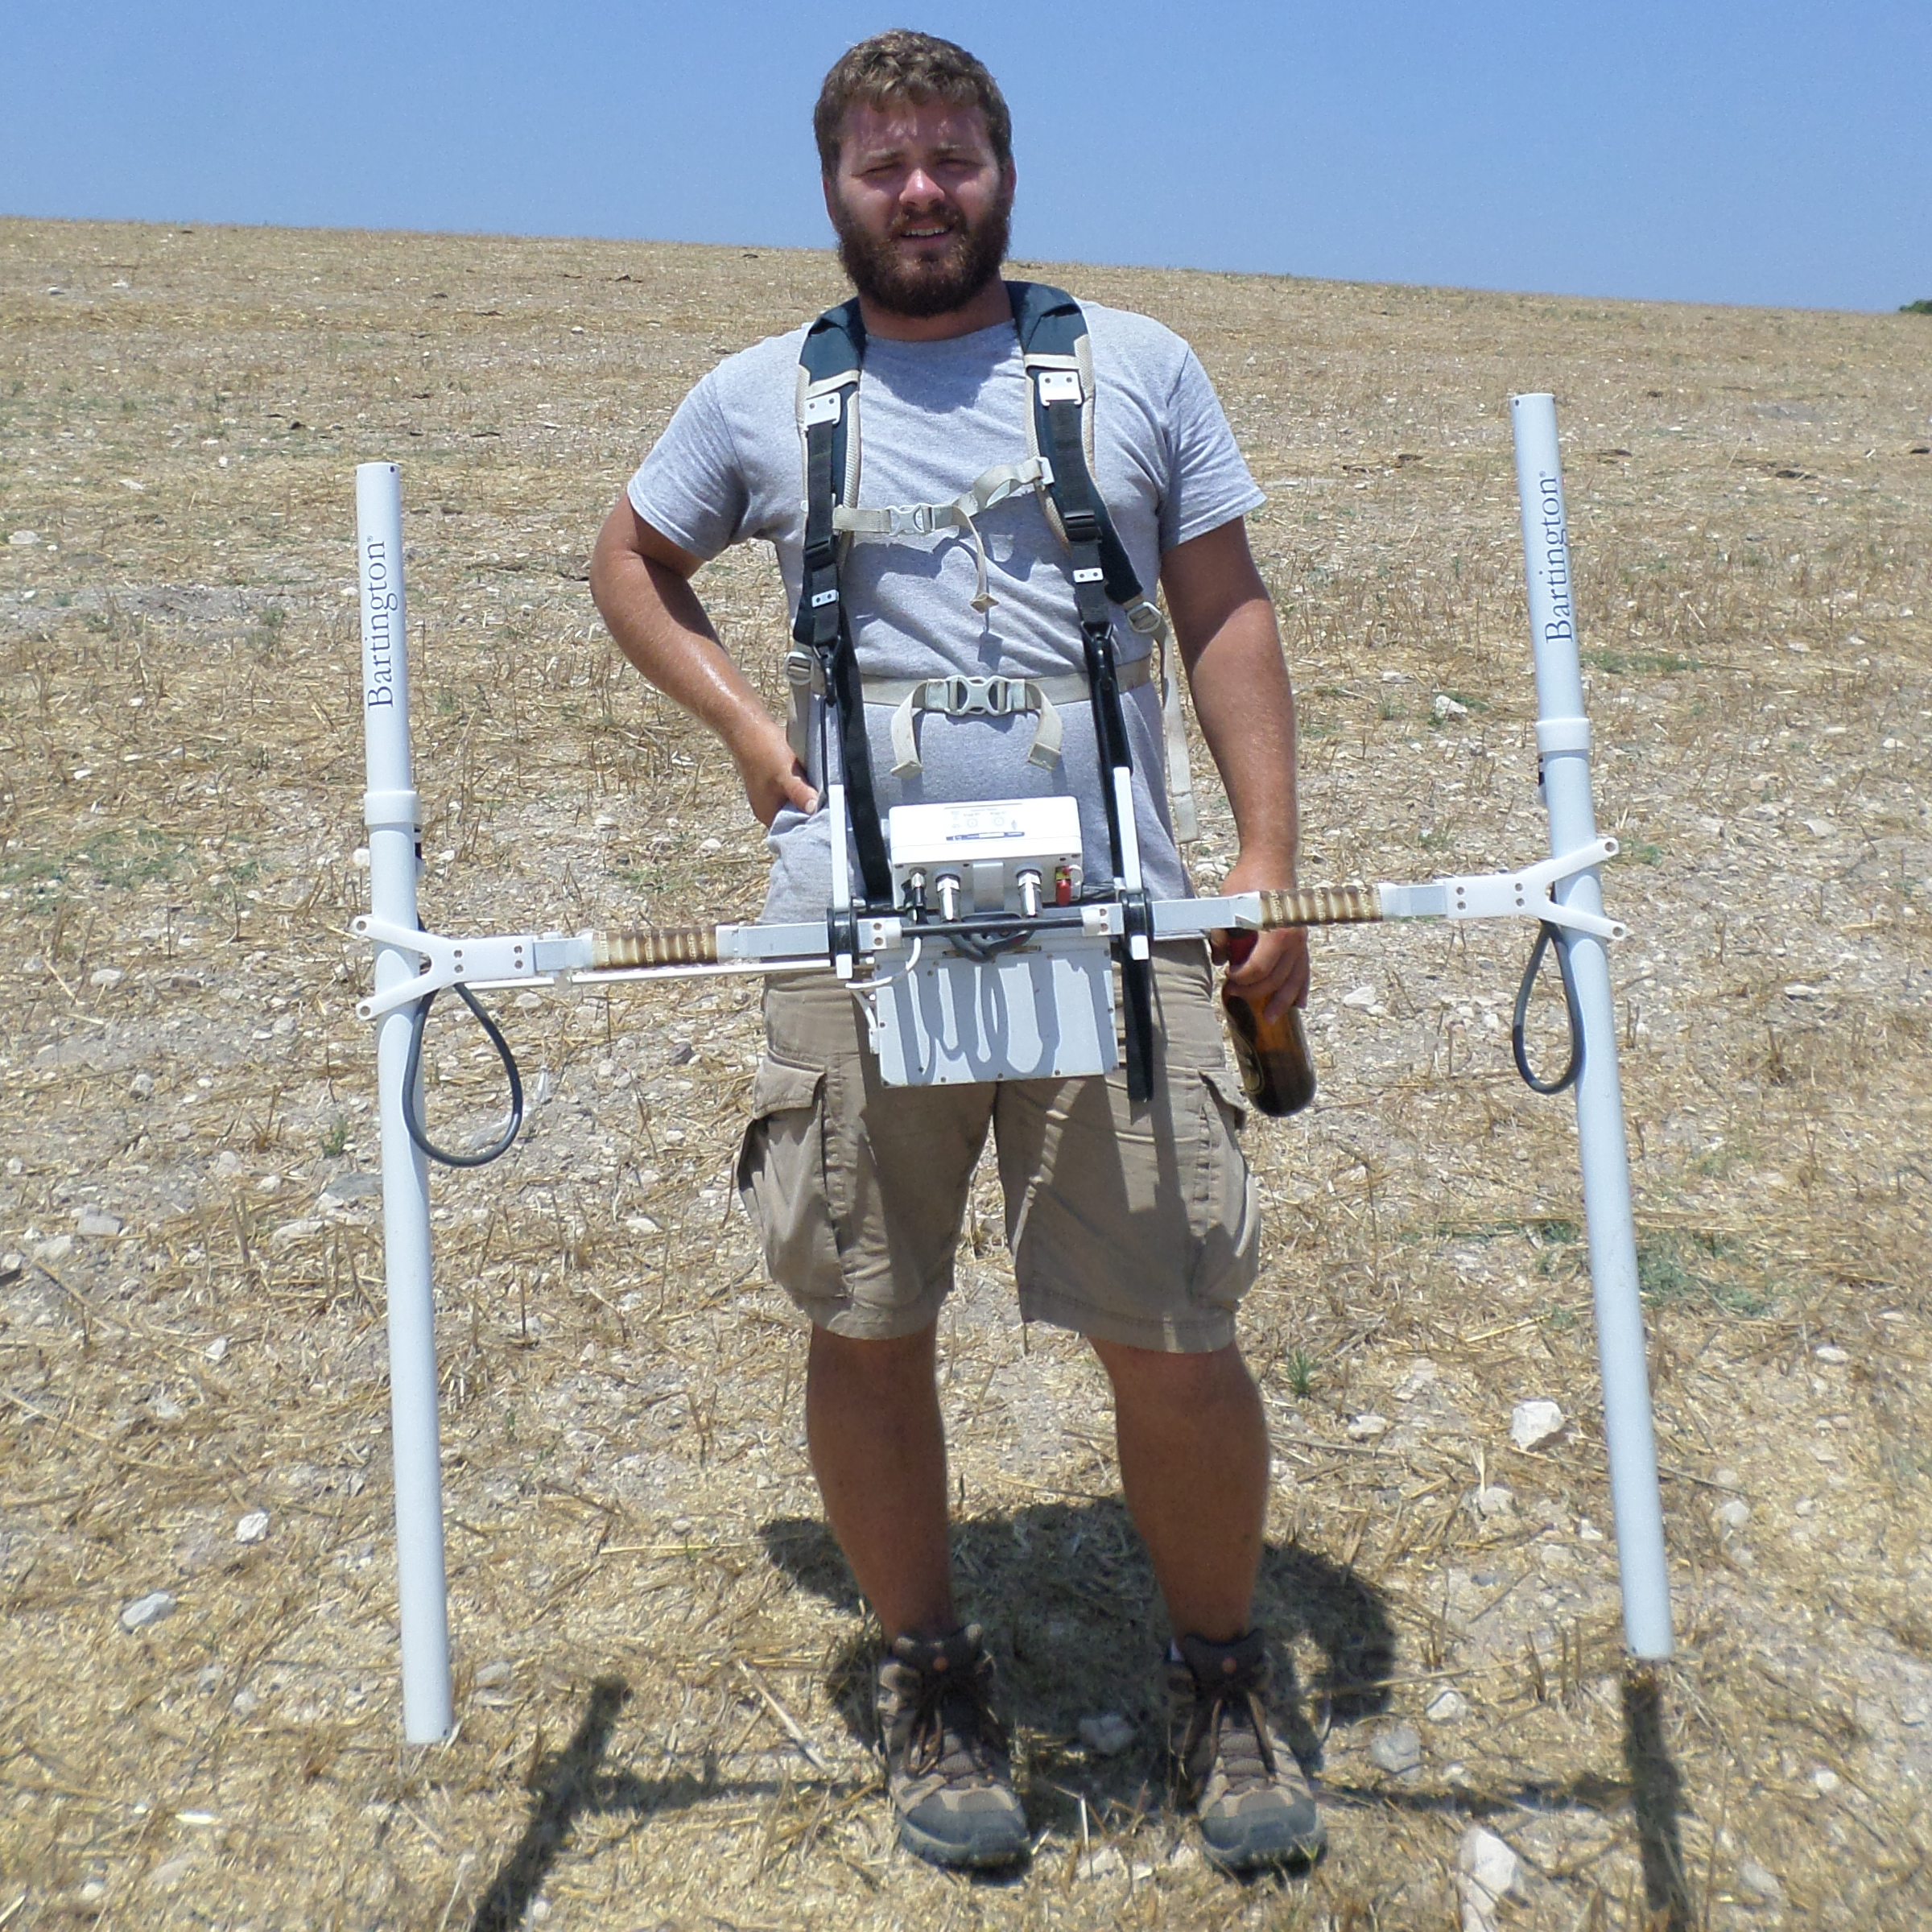 Jeremy standing in open field with GPR equipment.